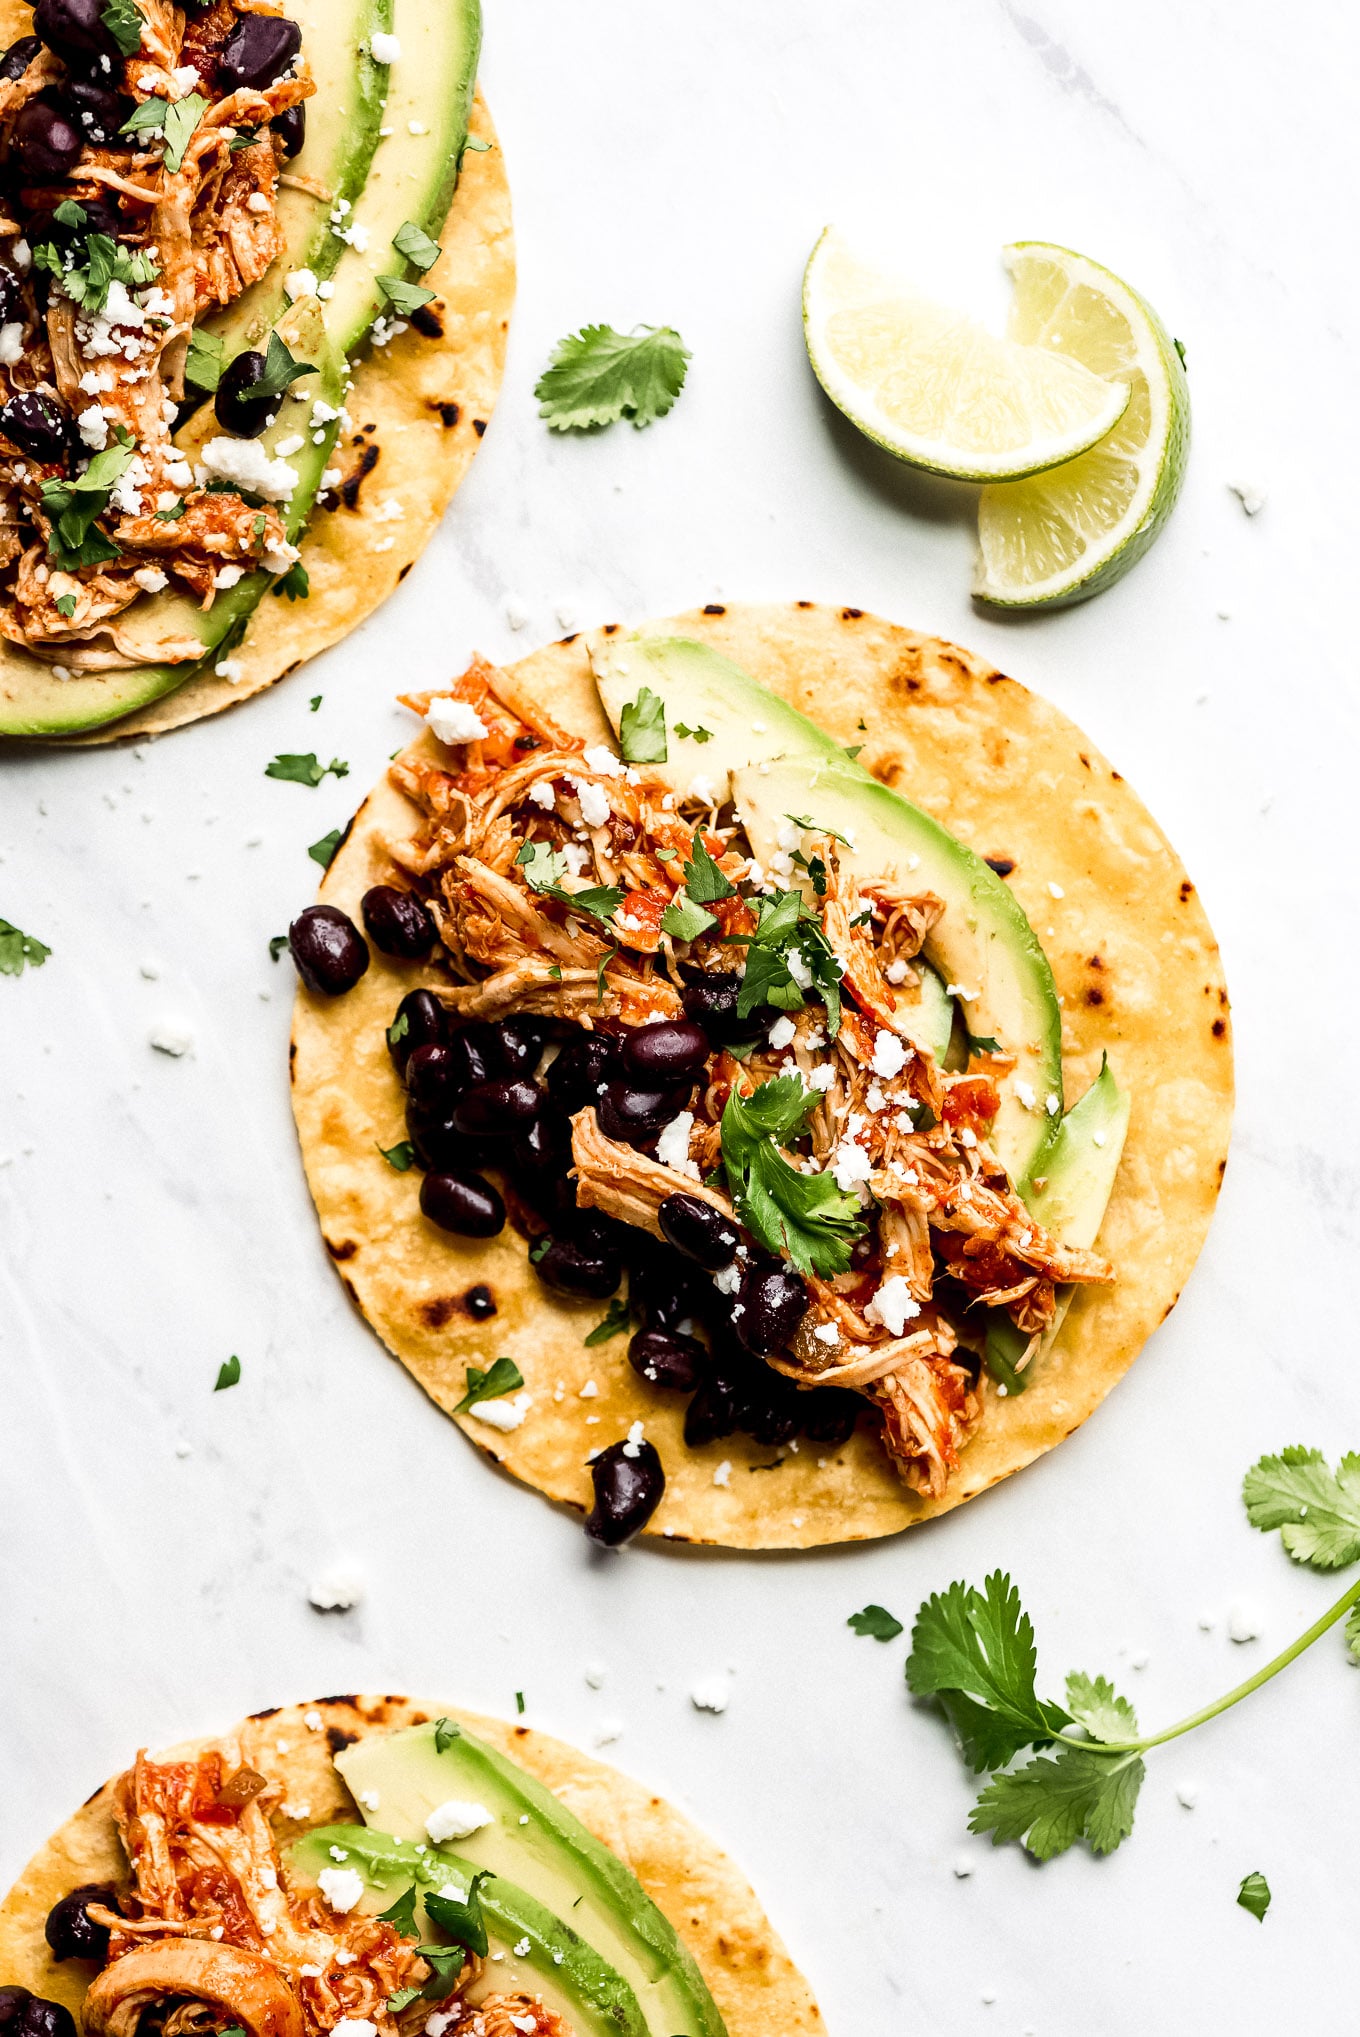 Corn tortillas on a table topped with shredded Salsa Chicken, black beans, avocado slices, cilantro, and Queso Fresco.